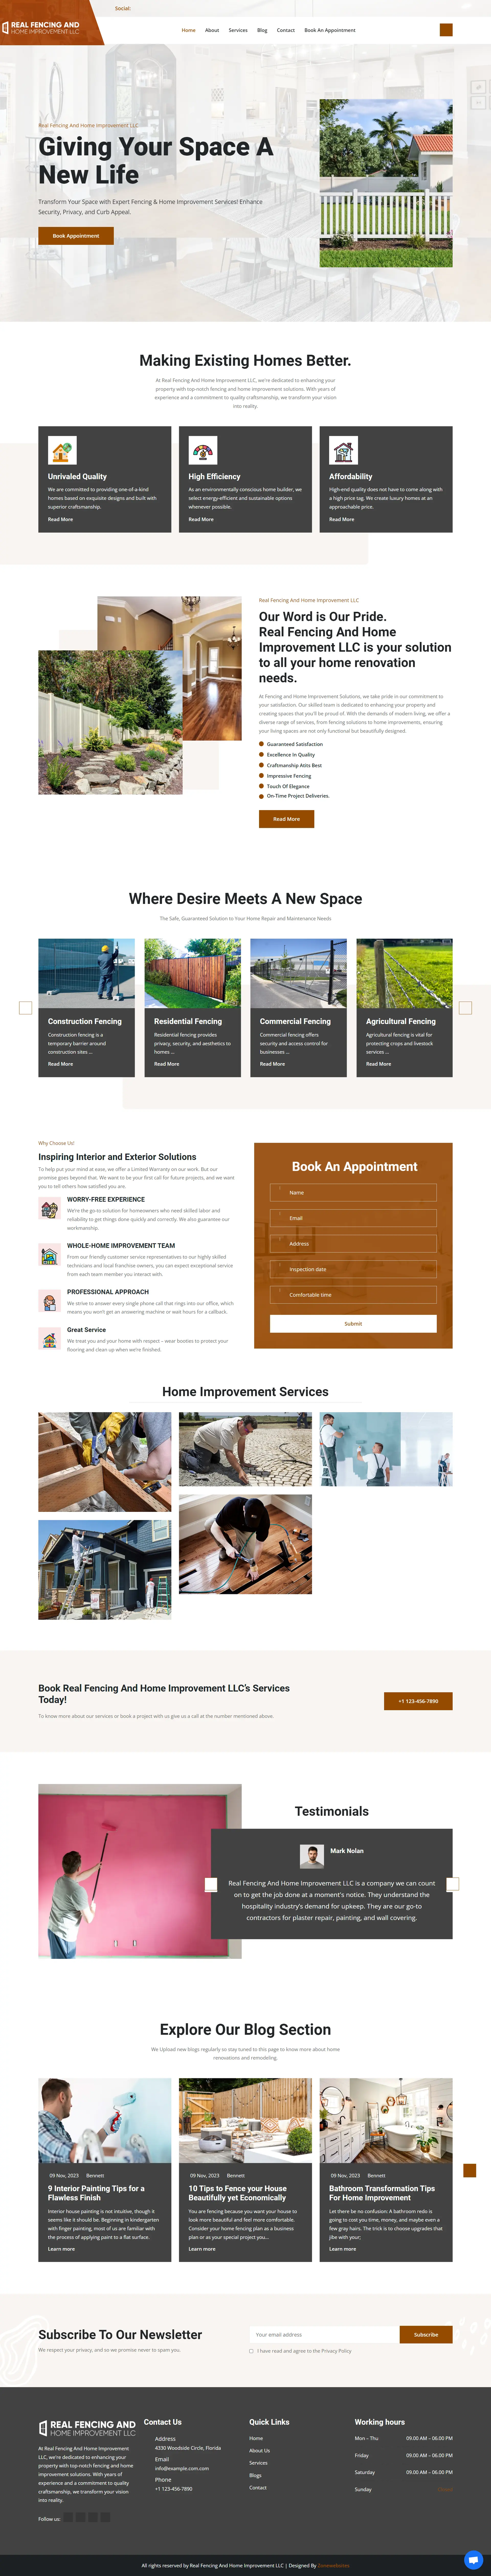 Make a Digital Presence With Home Improvement Website Layout